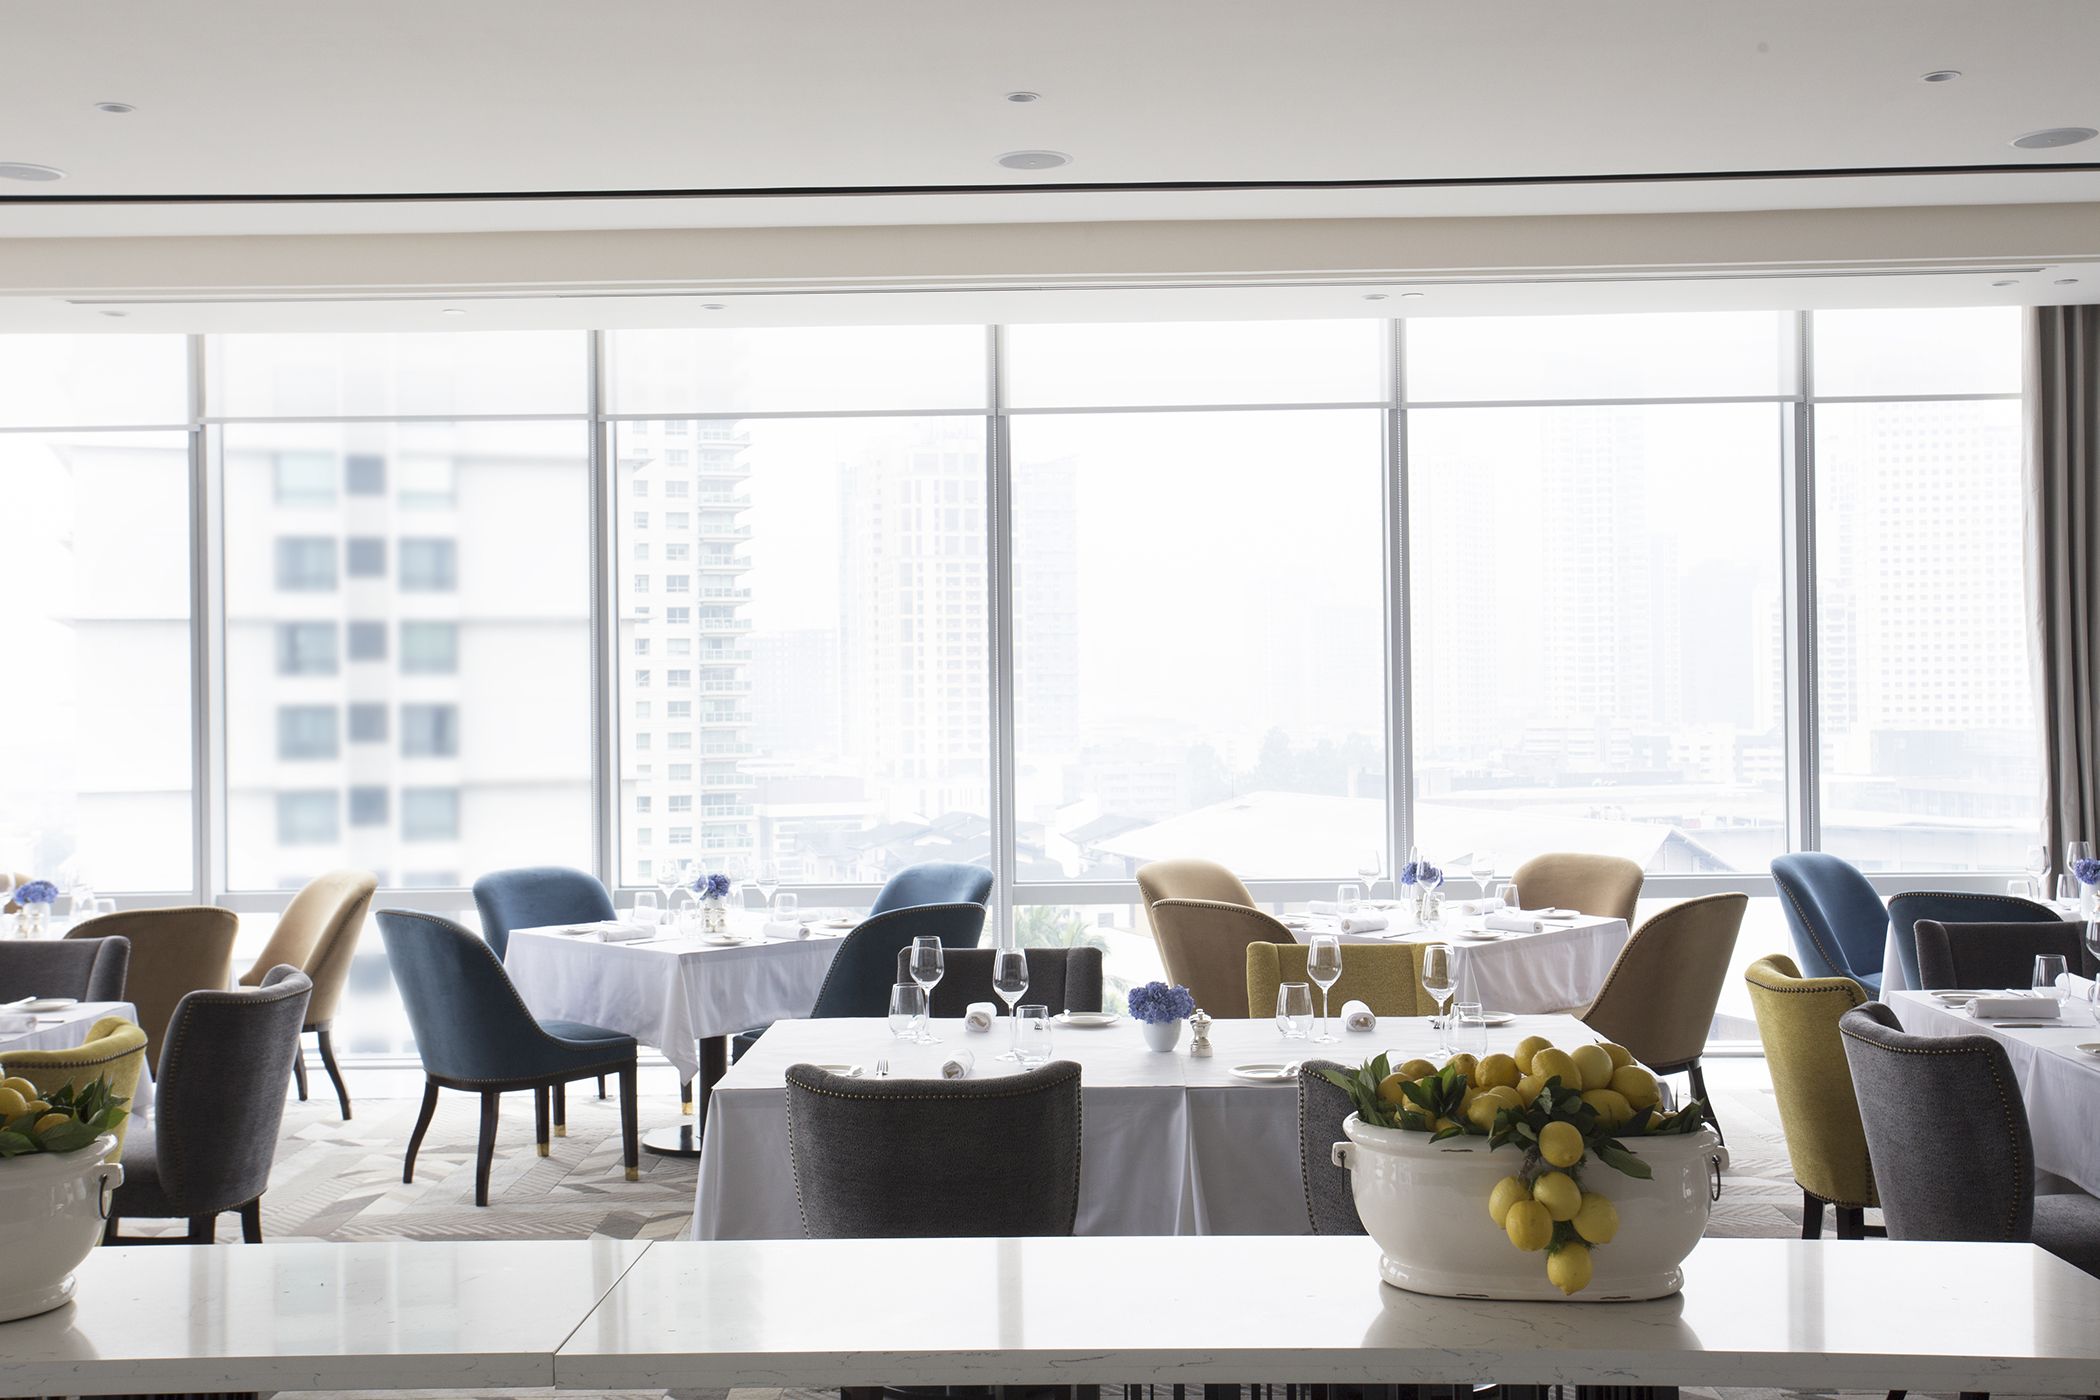 mireio-main-dining-area-with-a-view-of-the-city